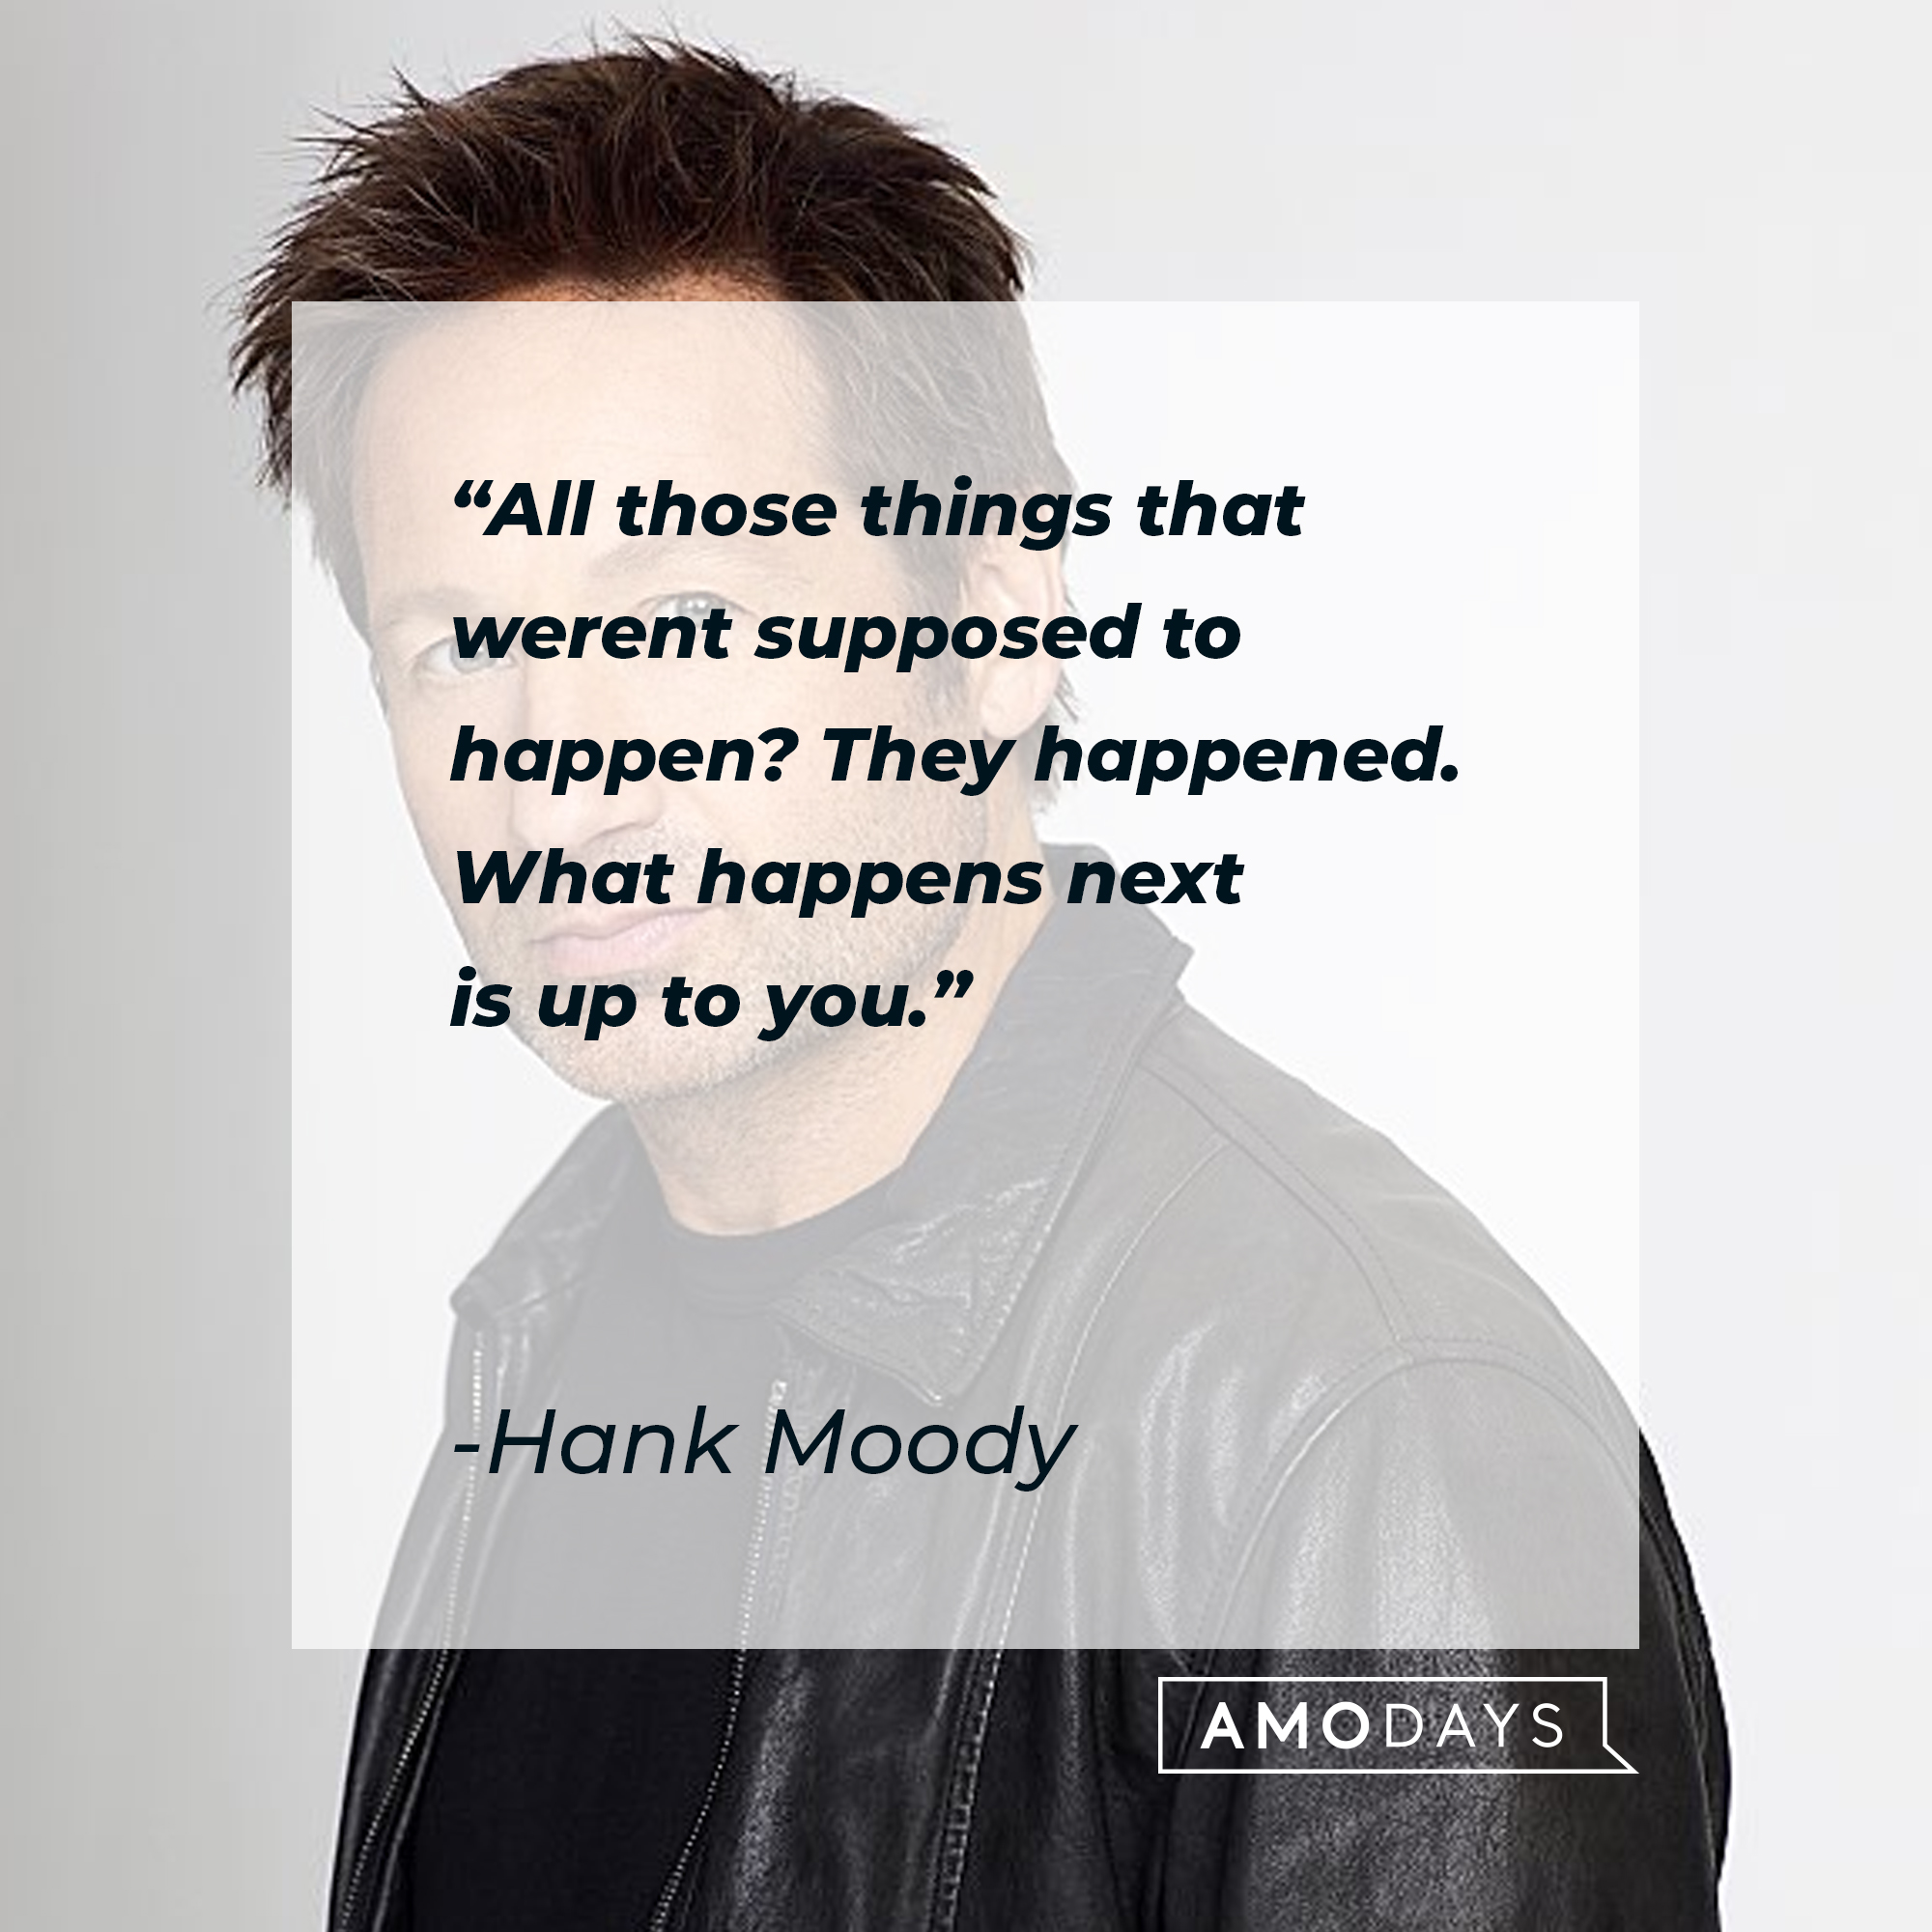 Hank Moody's quote: "All those things that werent supposed to happen? They happened. What happens next is up to you." | Image: AmoDays